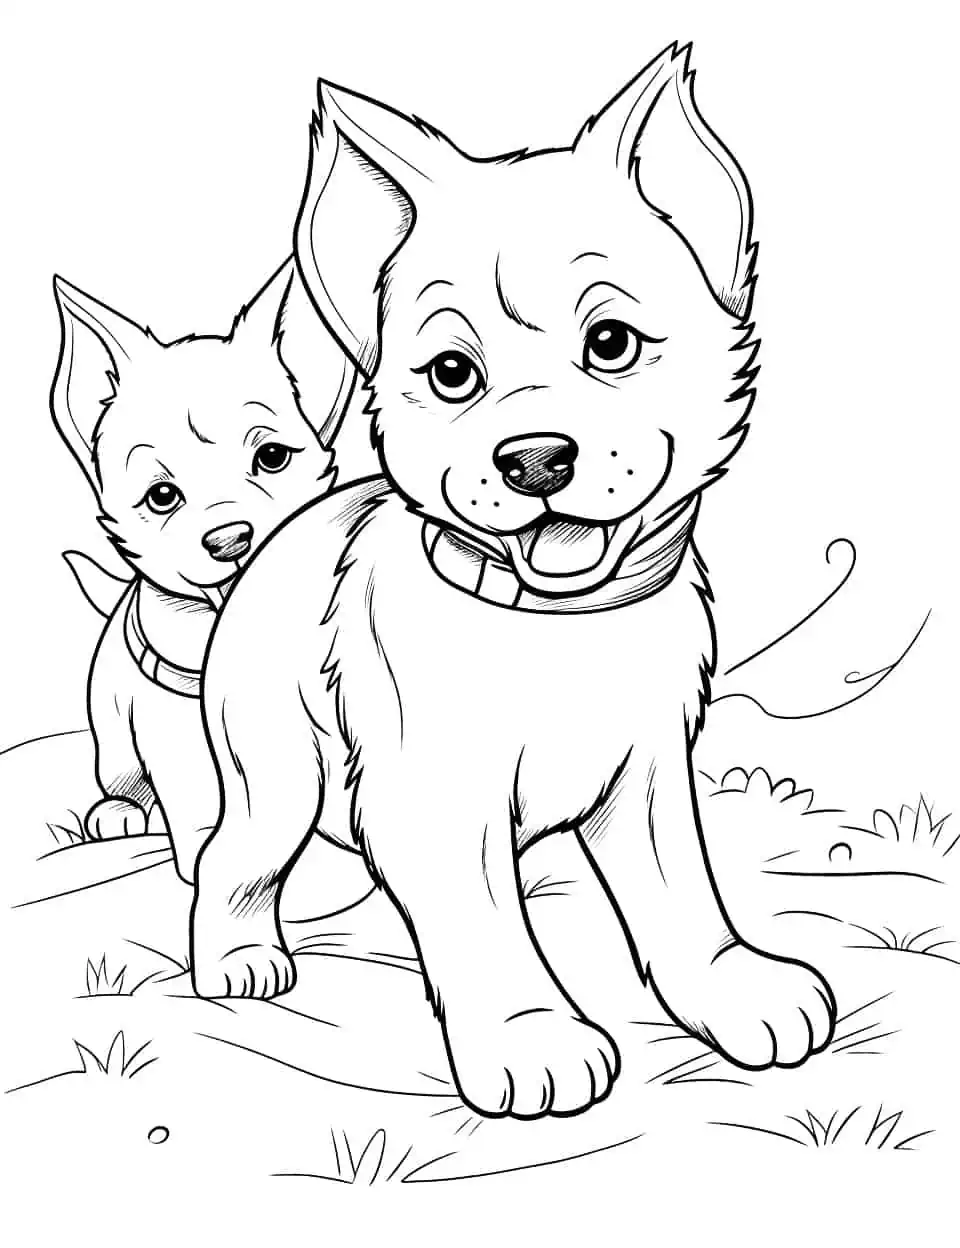 Playful Husky Puppies Dog Coloring Page - Two adorable Husky puppies playing in the grass.